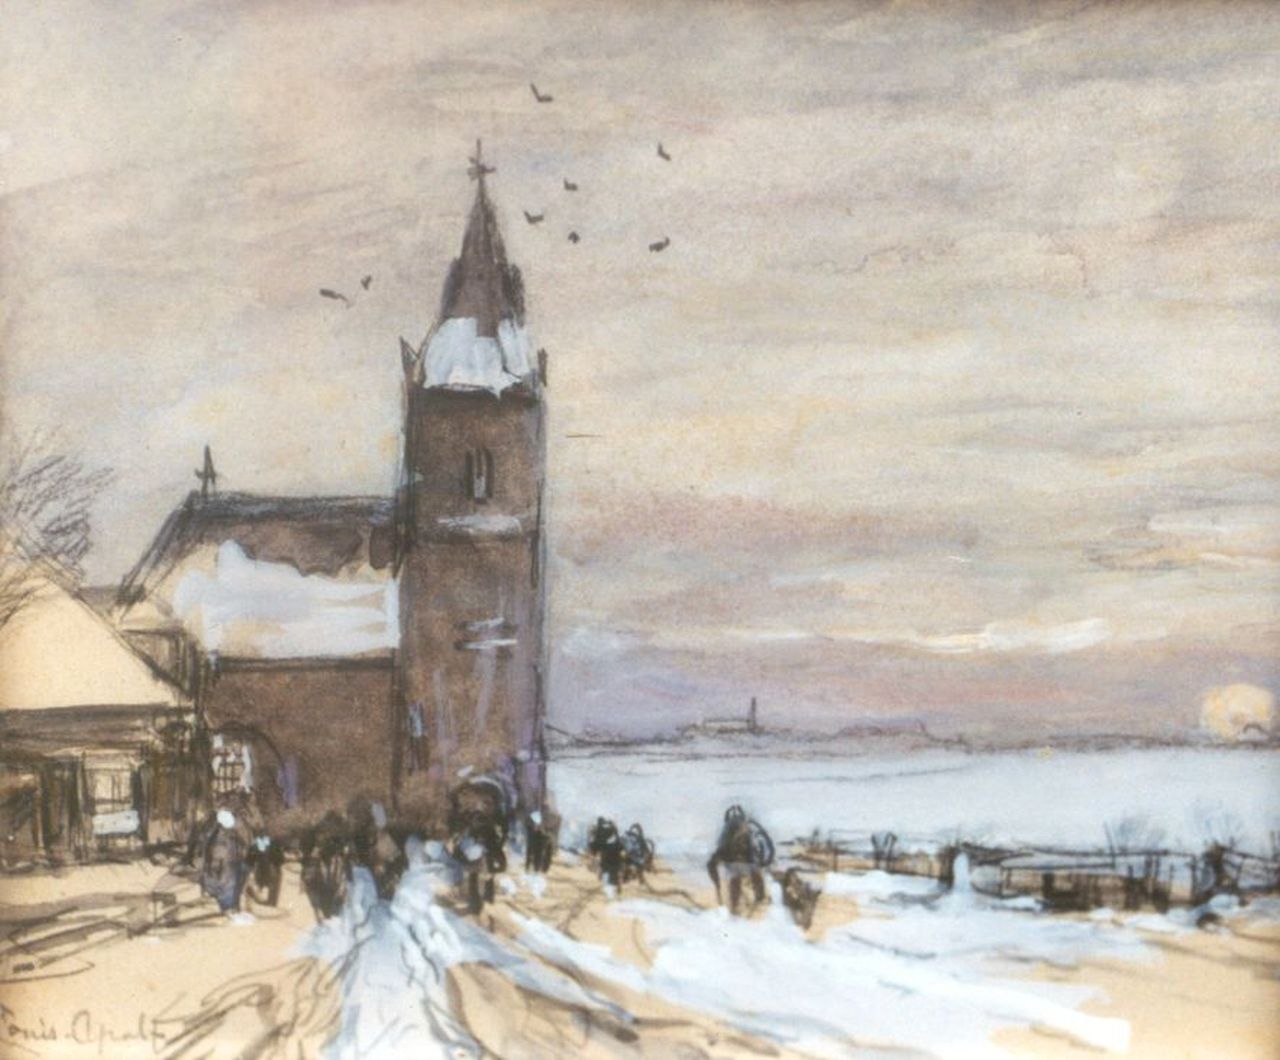 Apol L.F.H.  | Lodewijk Franciscus Hendrik 'Louis' Apol, Church-attendance in a snow-covered landscape, watercolour on paper 13.1 x 15.2 cm, signed l.l.